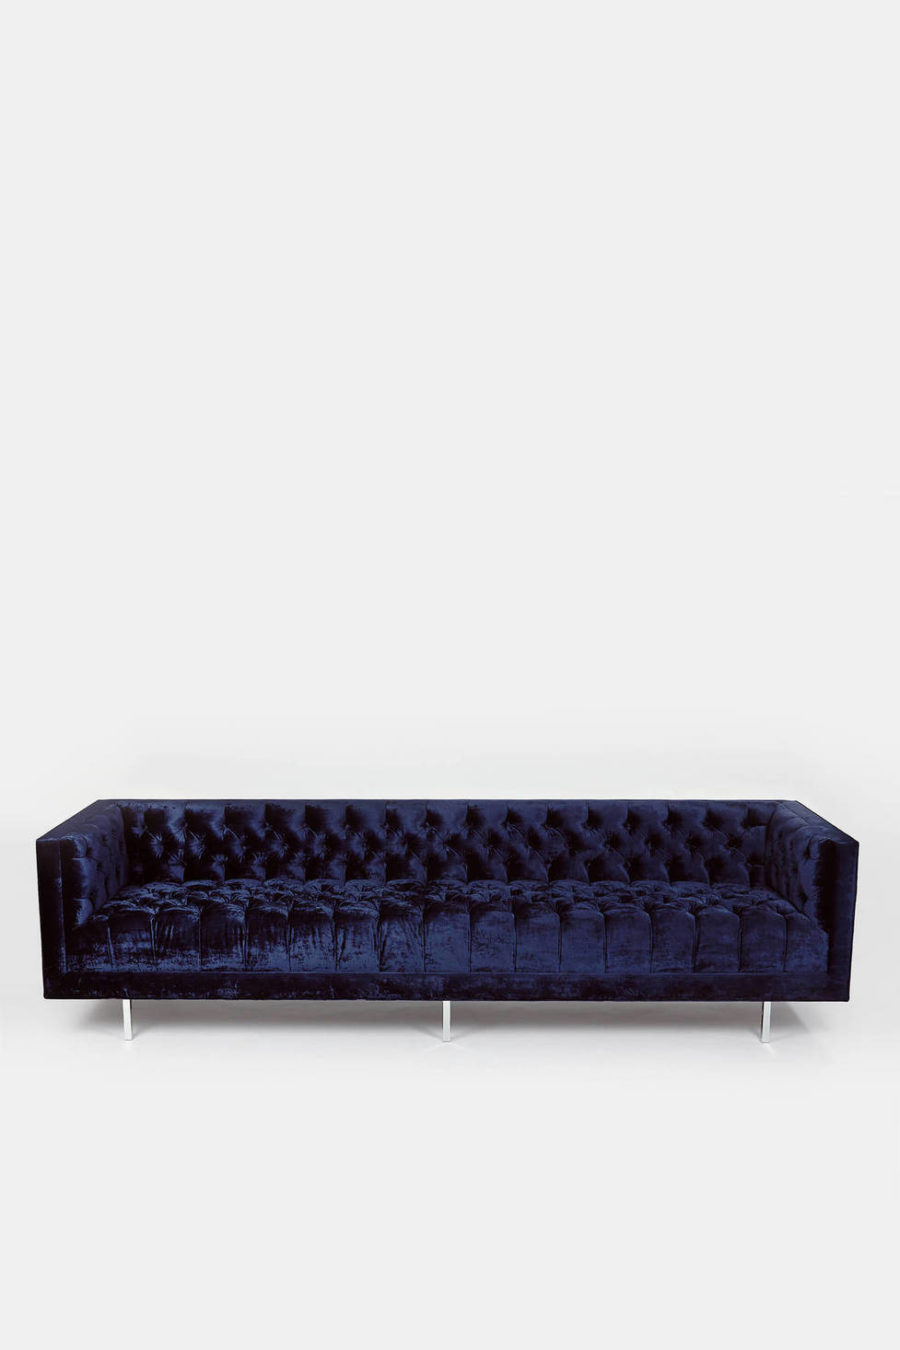 20 Velvet Couches That Add Sophistication and Eclectiscism